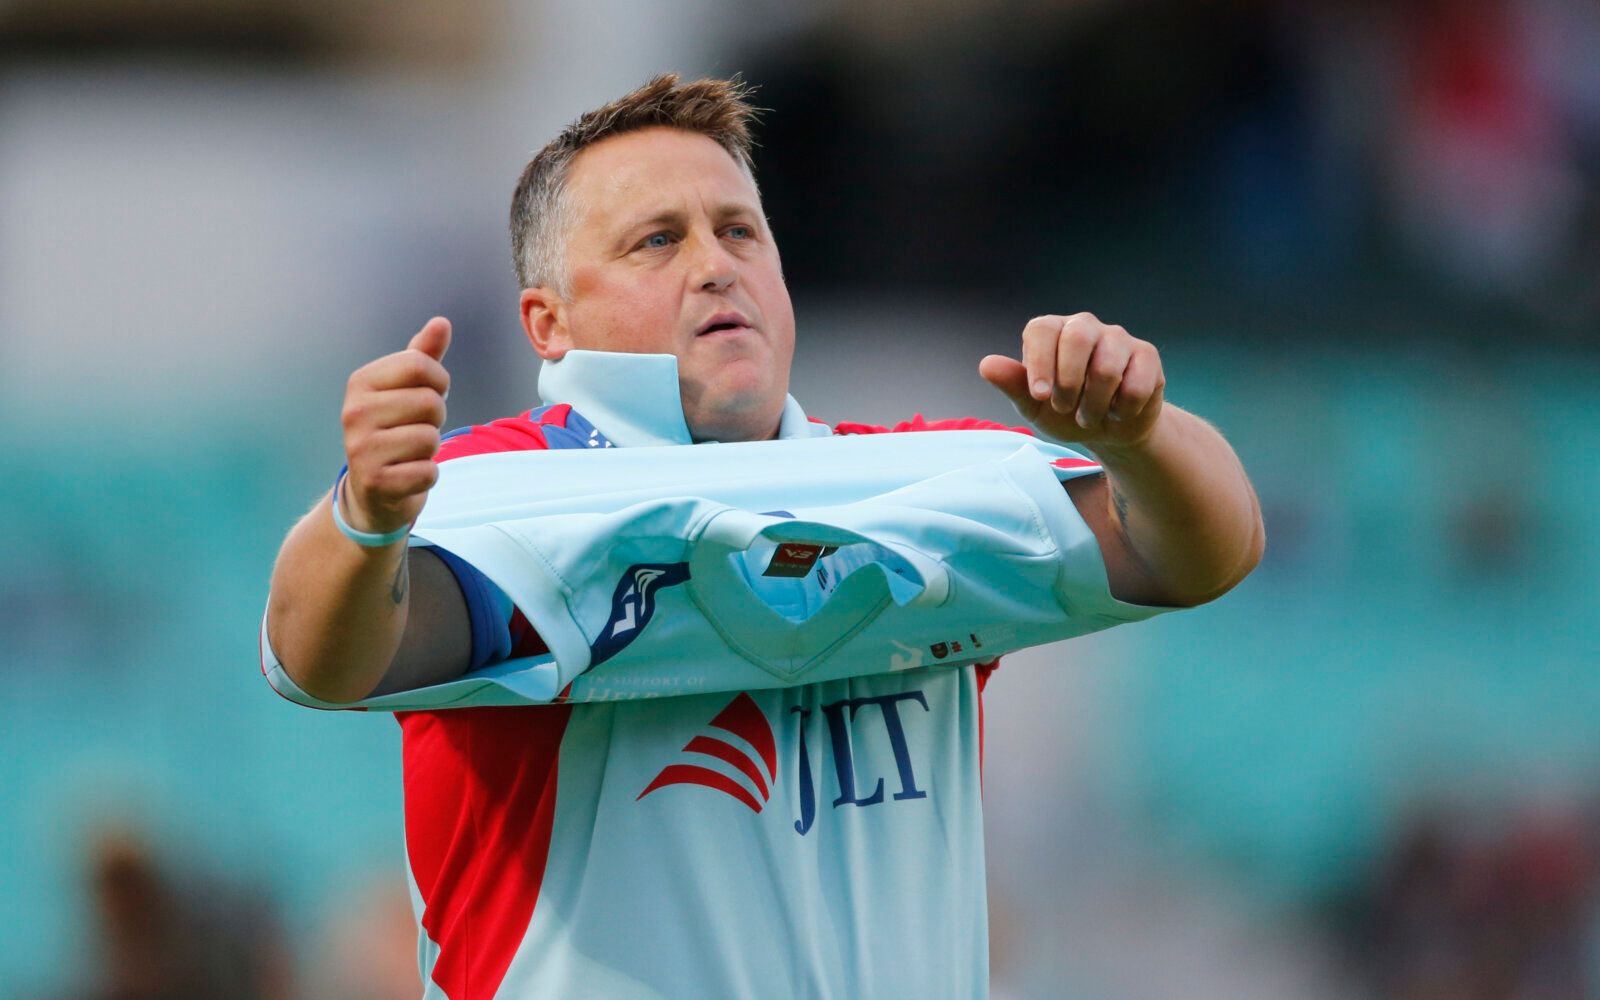 Cricket - Help for Heroes XI v Rest of the World XI - Cricket for Heroes T20 Charity Match - The Kia Oval - 17/9/15
Darren Gough of Help for Heroes XI
Mandatory Credit: Action Images / Paul Childs

EDITORIAL USE ONLY.